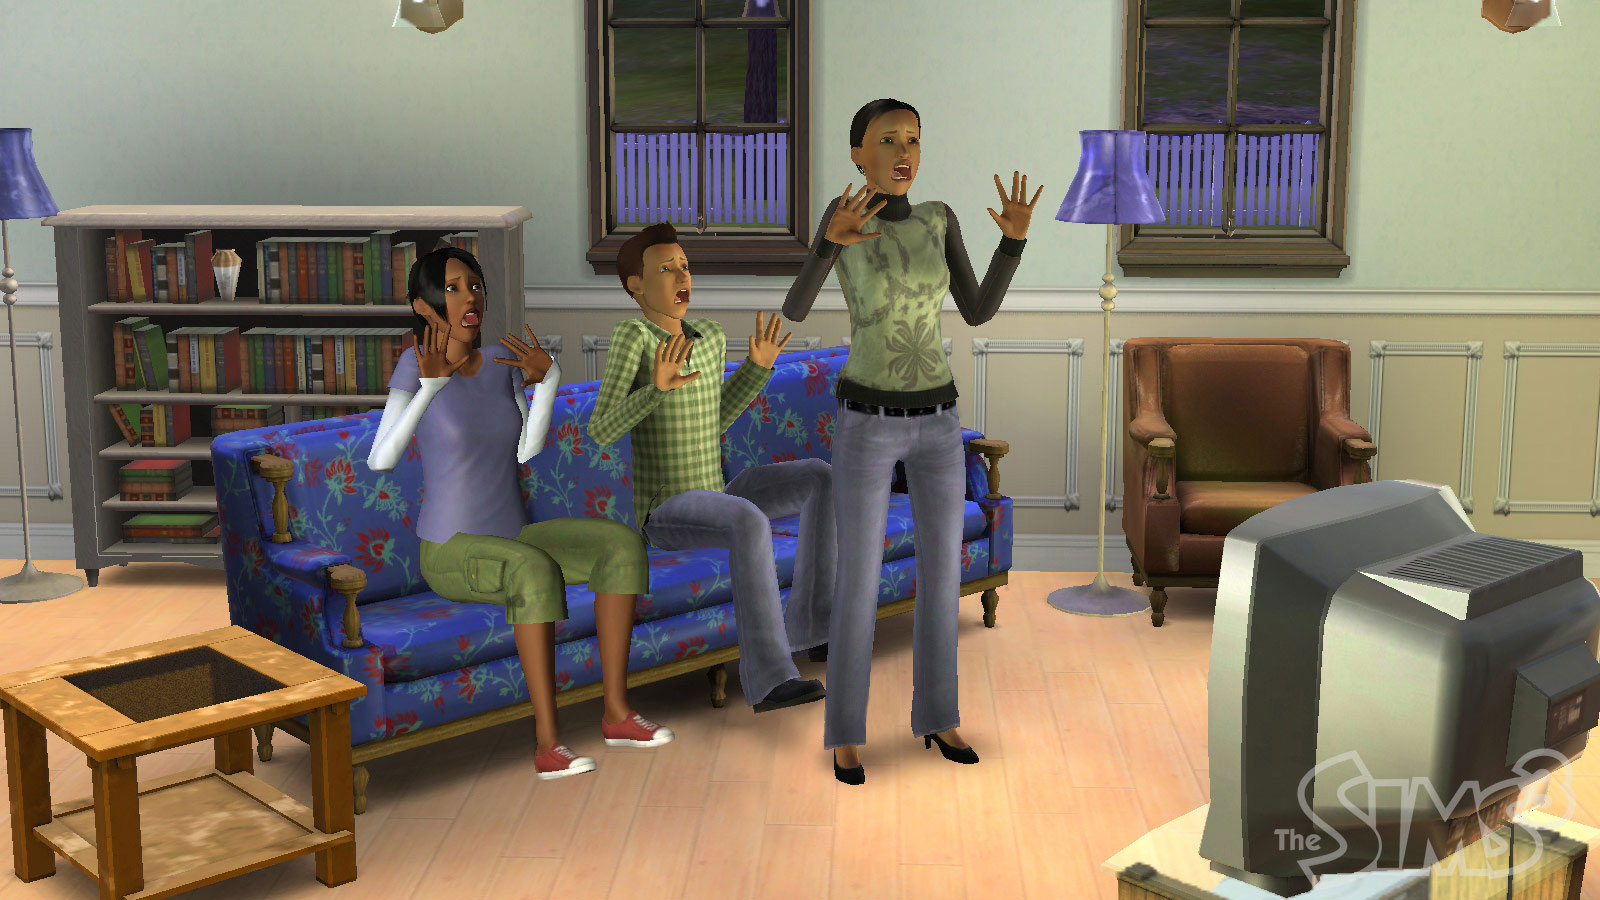 The Sims 2 Pc Completo Gratis